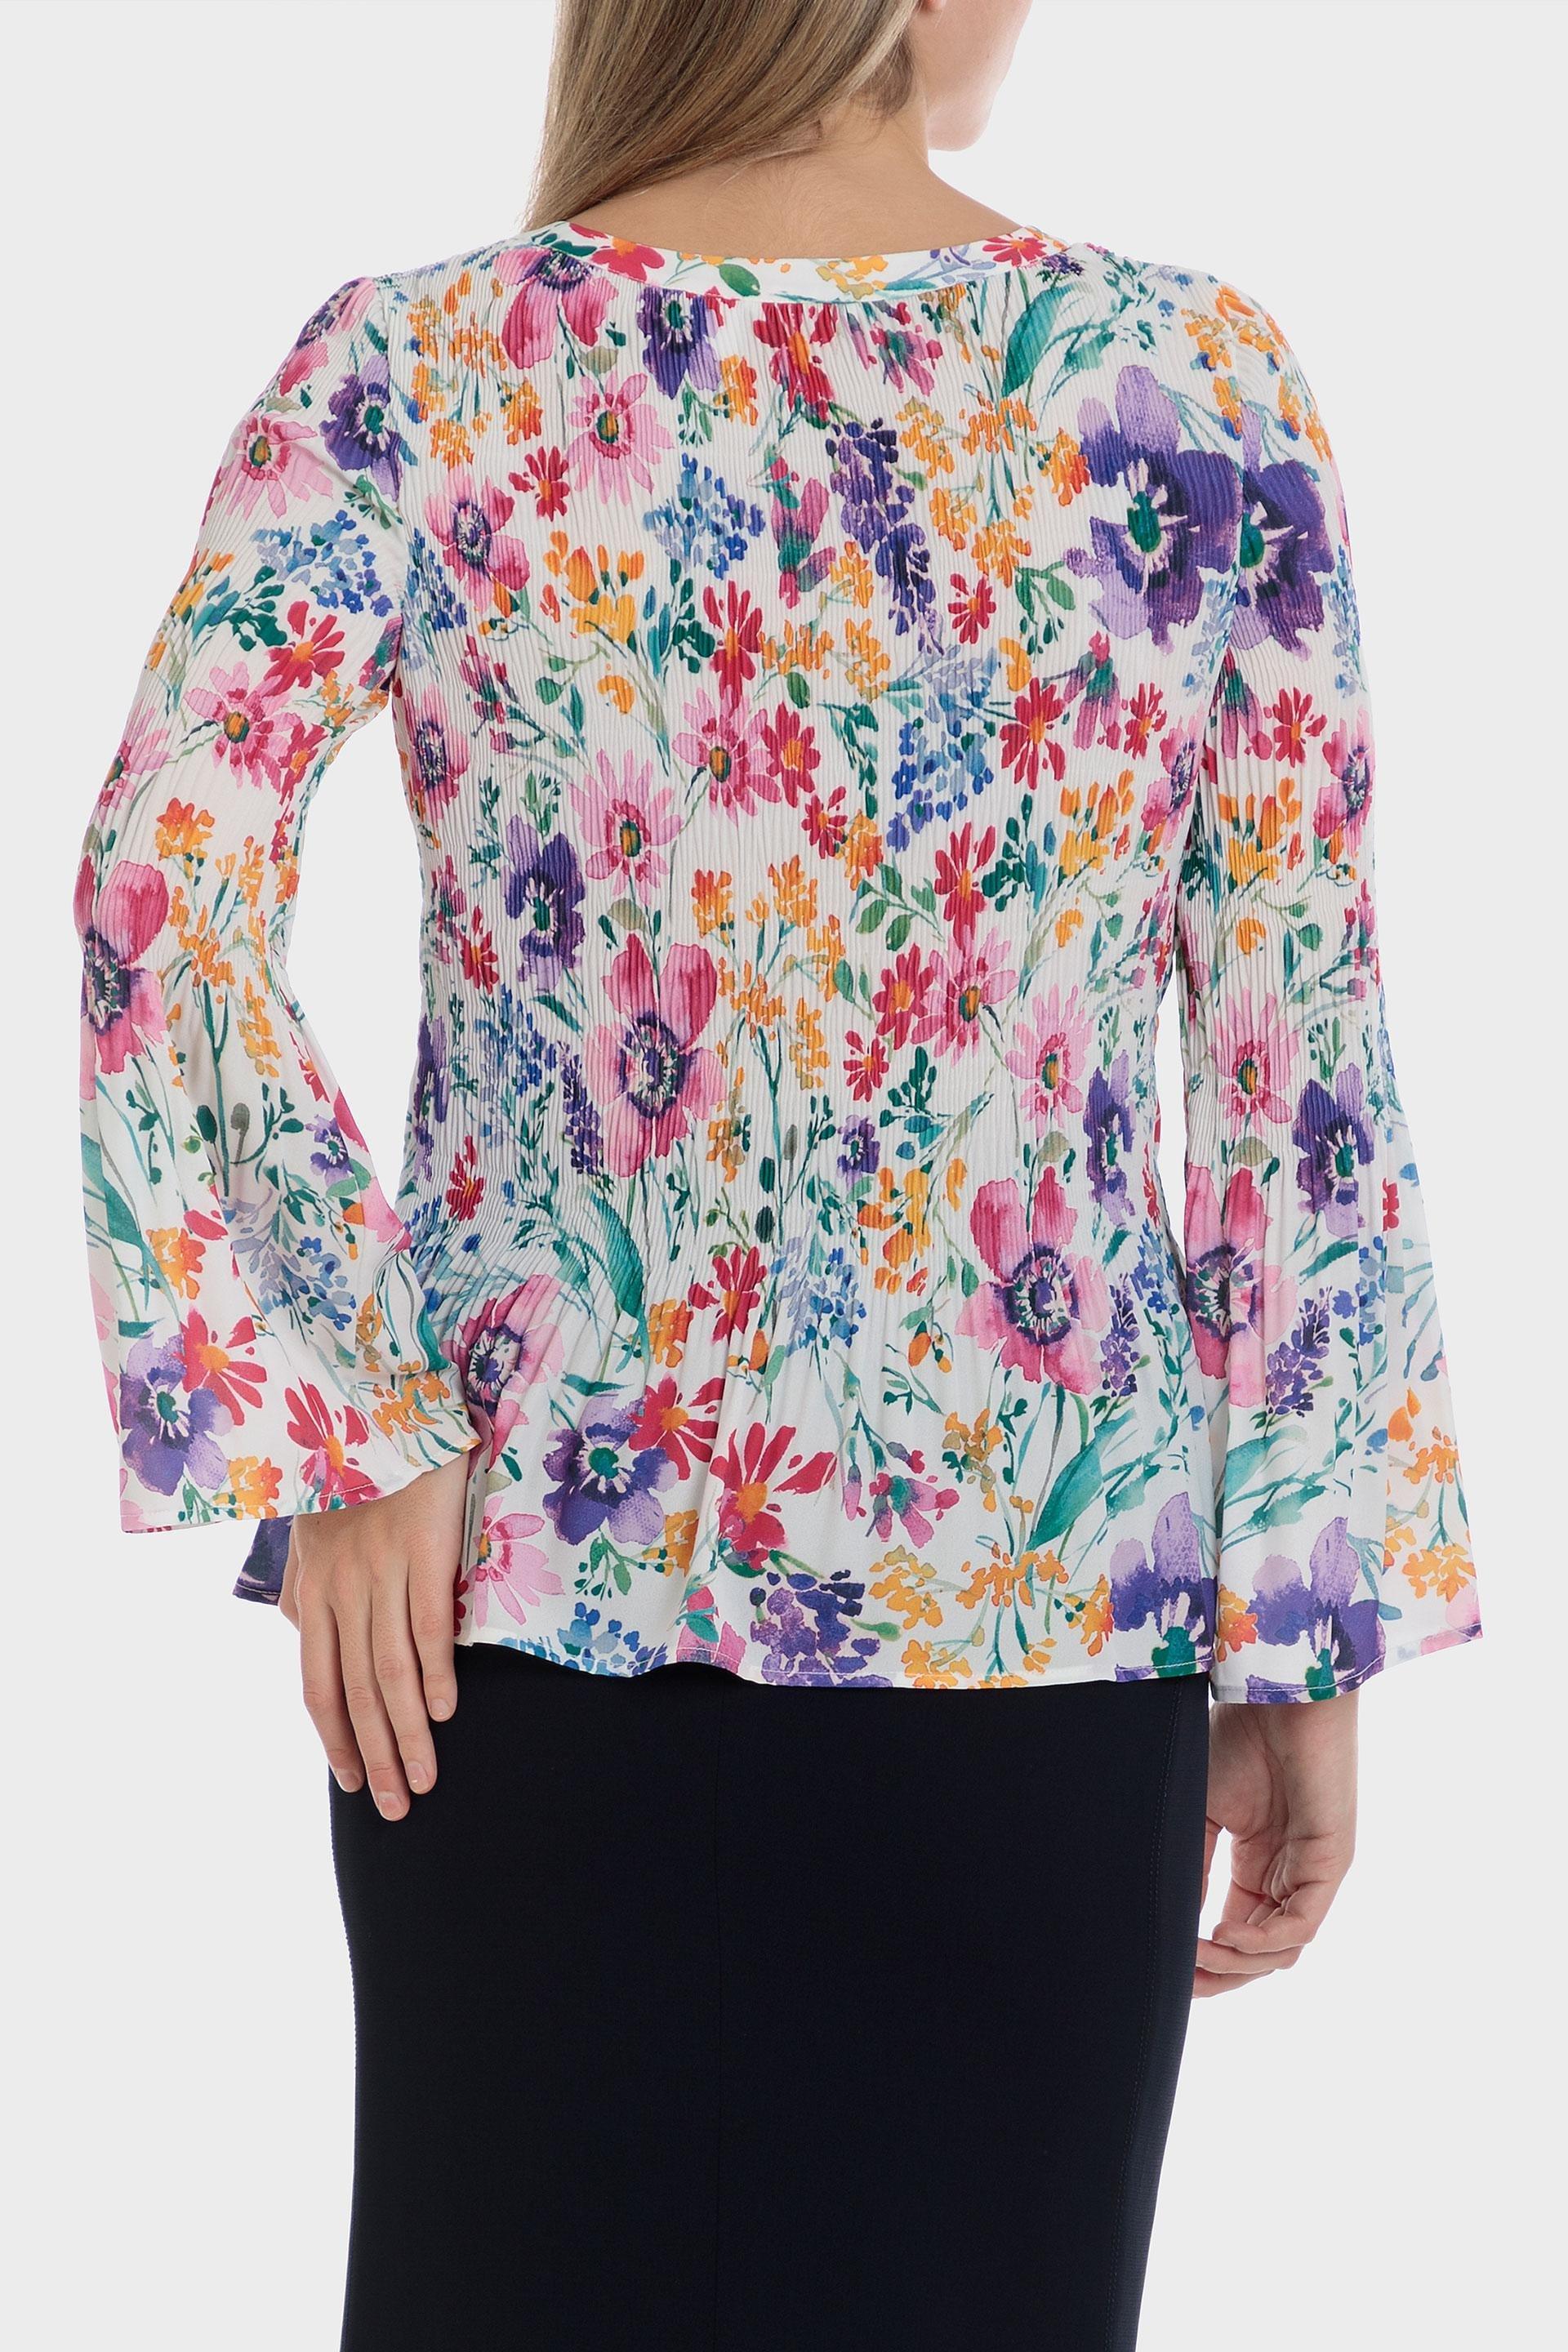 Punt Roma - Multicolour Pleated Floral Loose Fitting Blouse